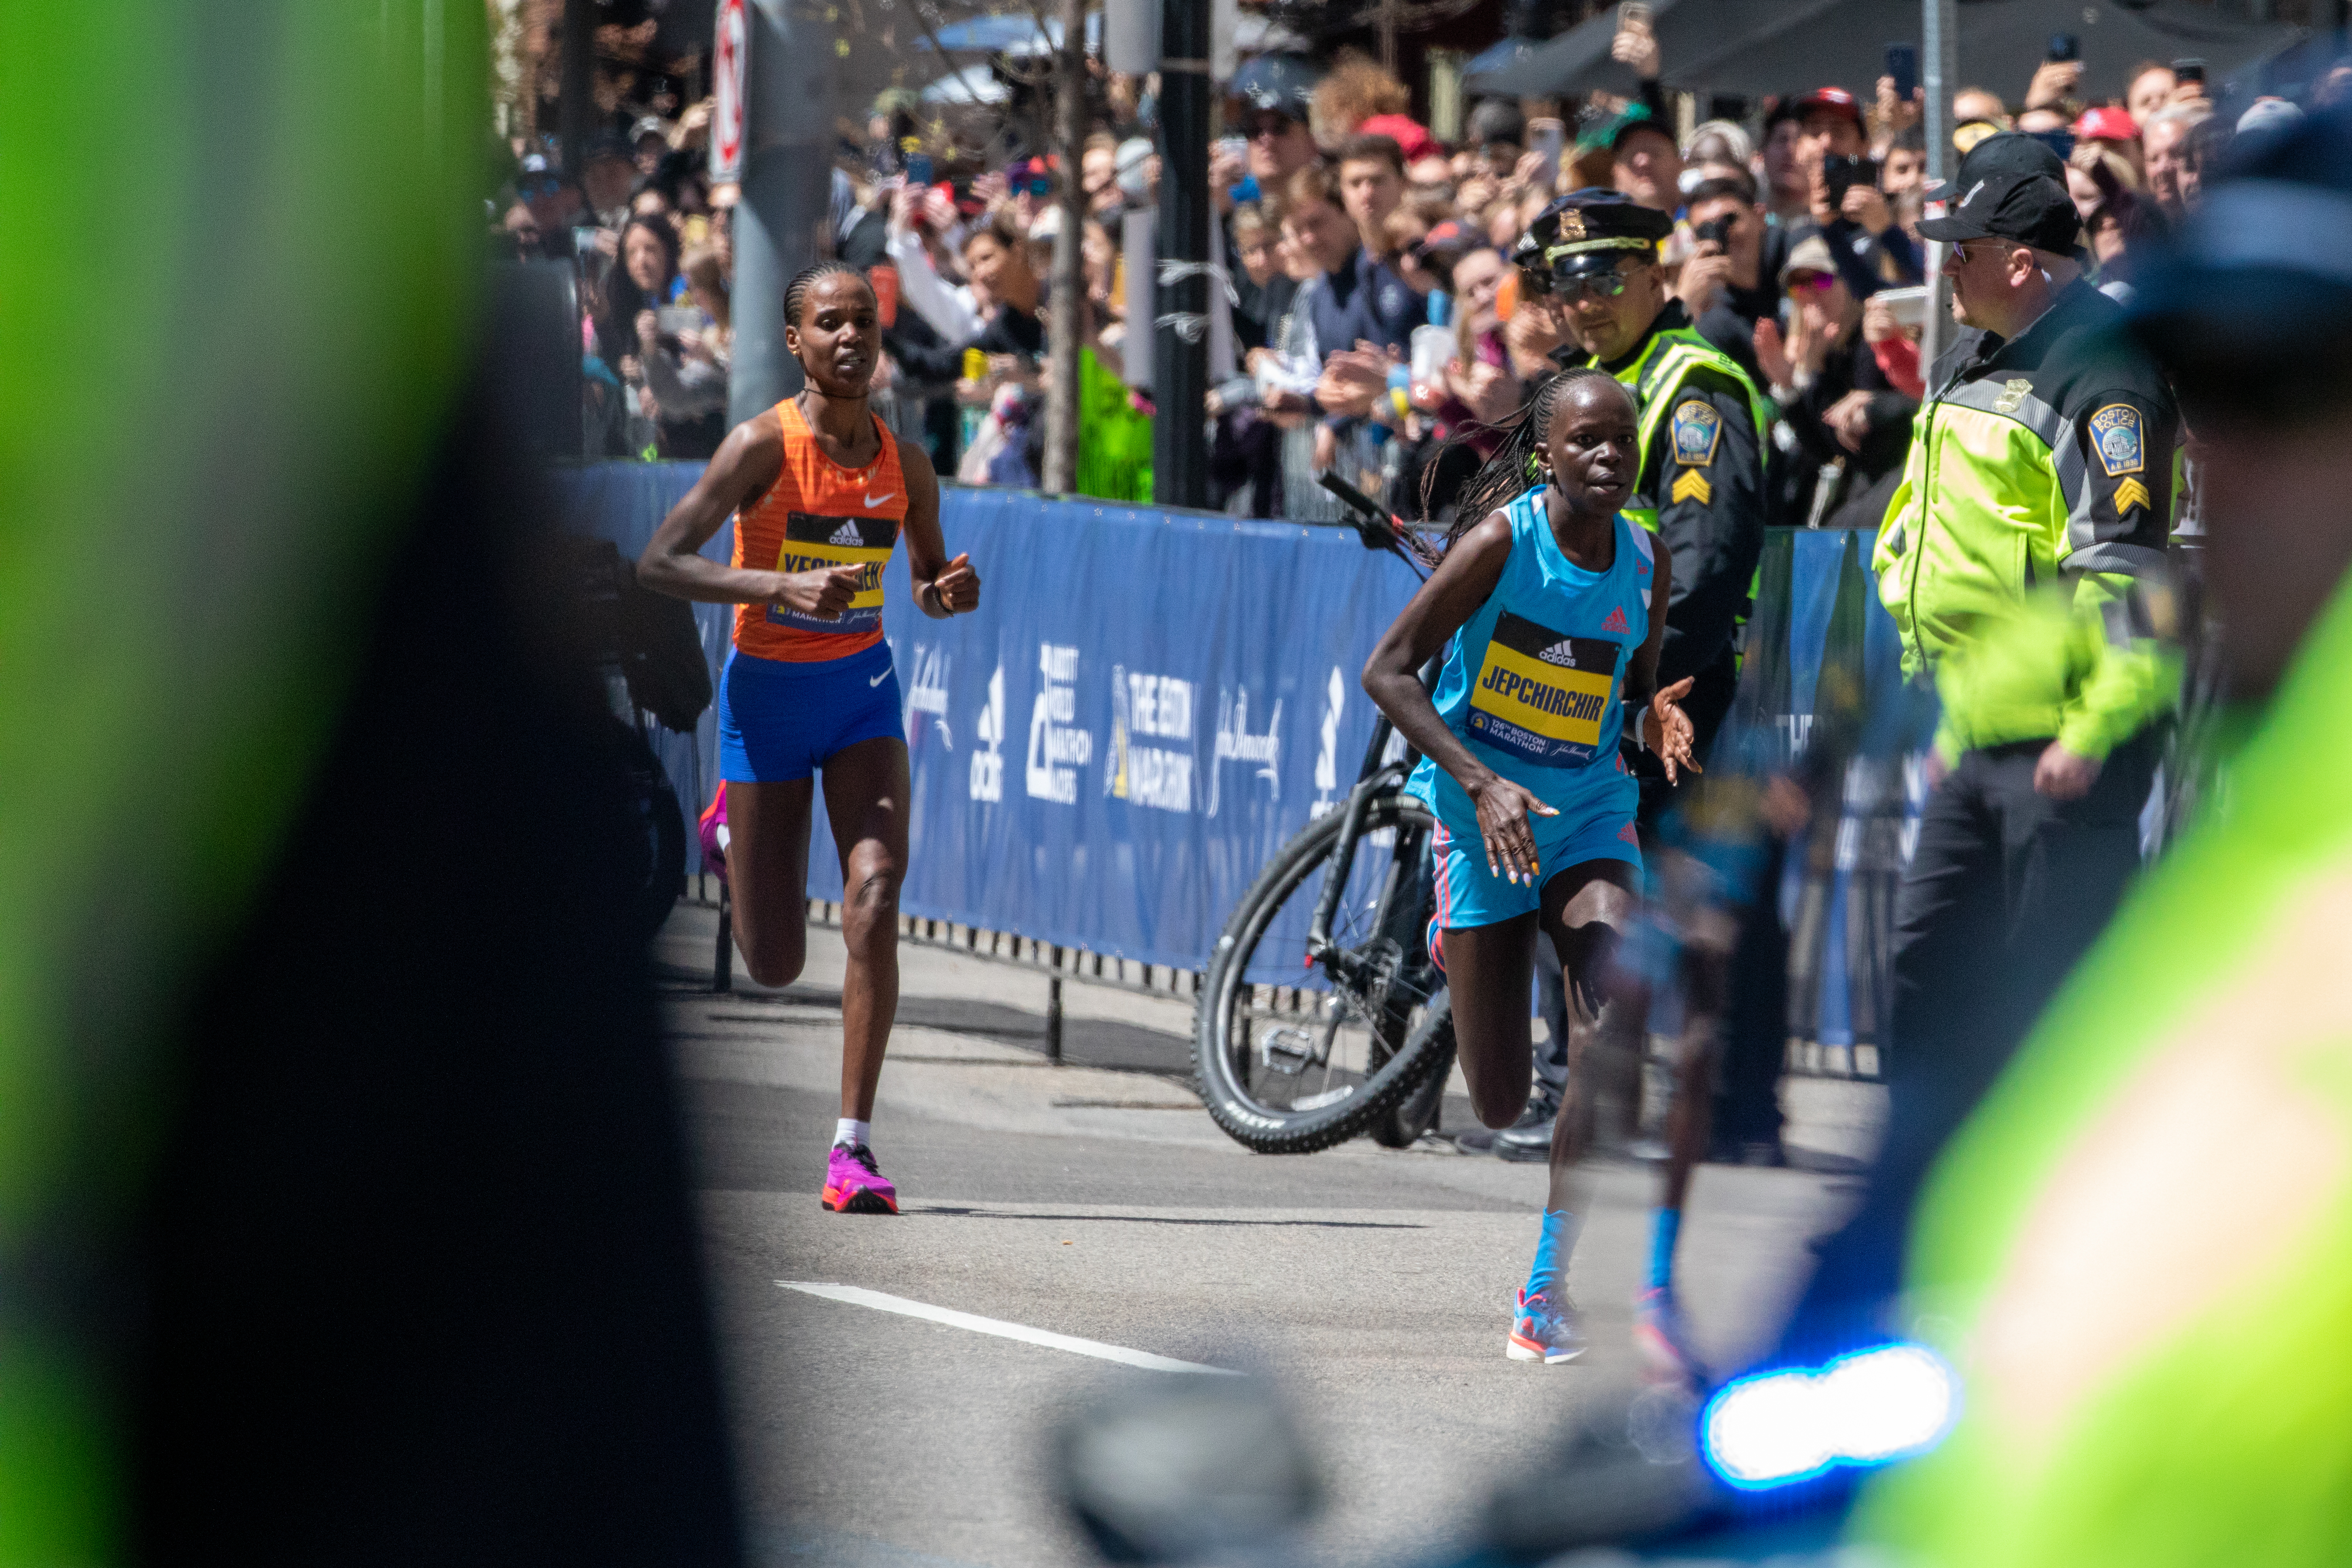 Peres Jepchirchir from Kenya, races and wins first place in the Womenâs elite division at the 126 Boston Marathon on April 18, 2022 in Boston, Massachusetts, United States. The 26.2-mile race returns to Patriotsâ Day this year for the first time in three years, since the start of the pandemic and brings 30,000 athletes, including runners from 122 countries and all 50 U.S. states to the Commonwealth.